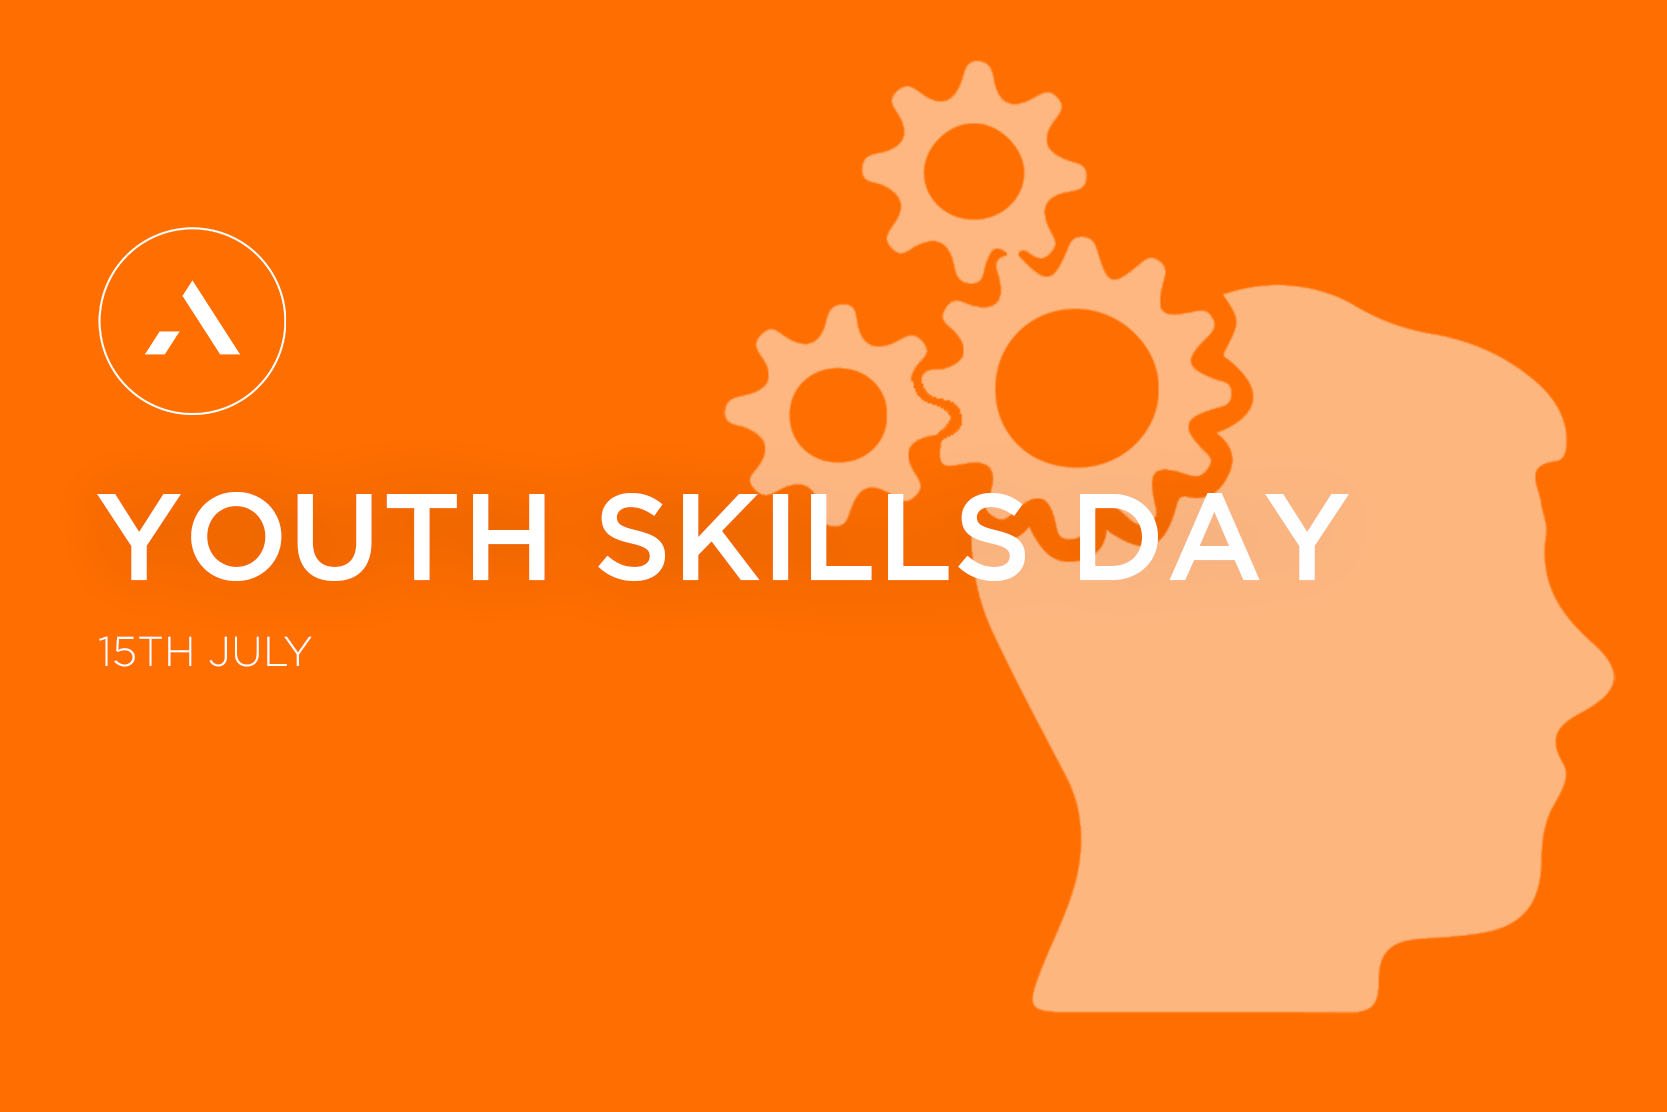 Youth skills day article 15th July-1